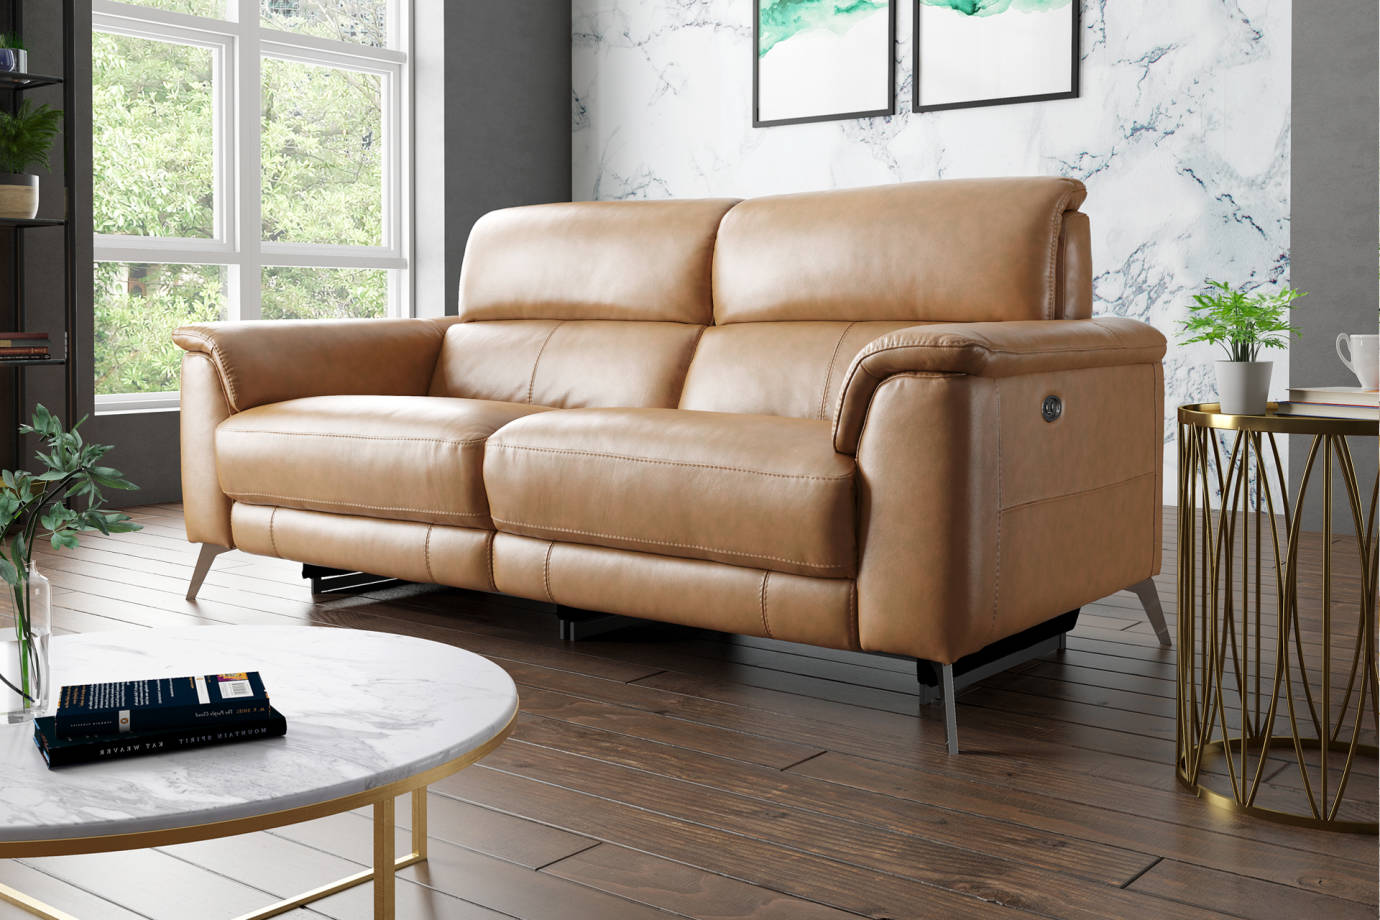 Recliner Sofas Leather Fabric And, Contemporary Leather Recliner Sofa